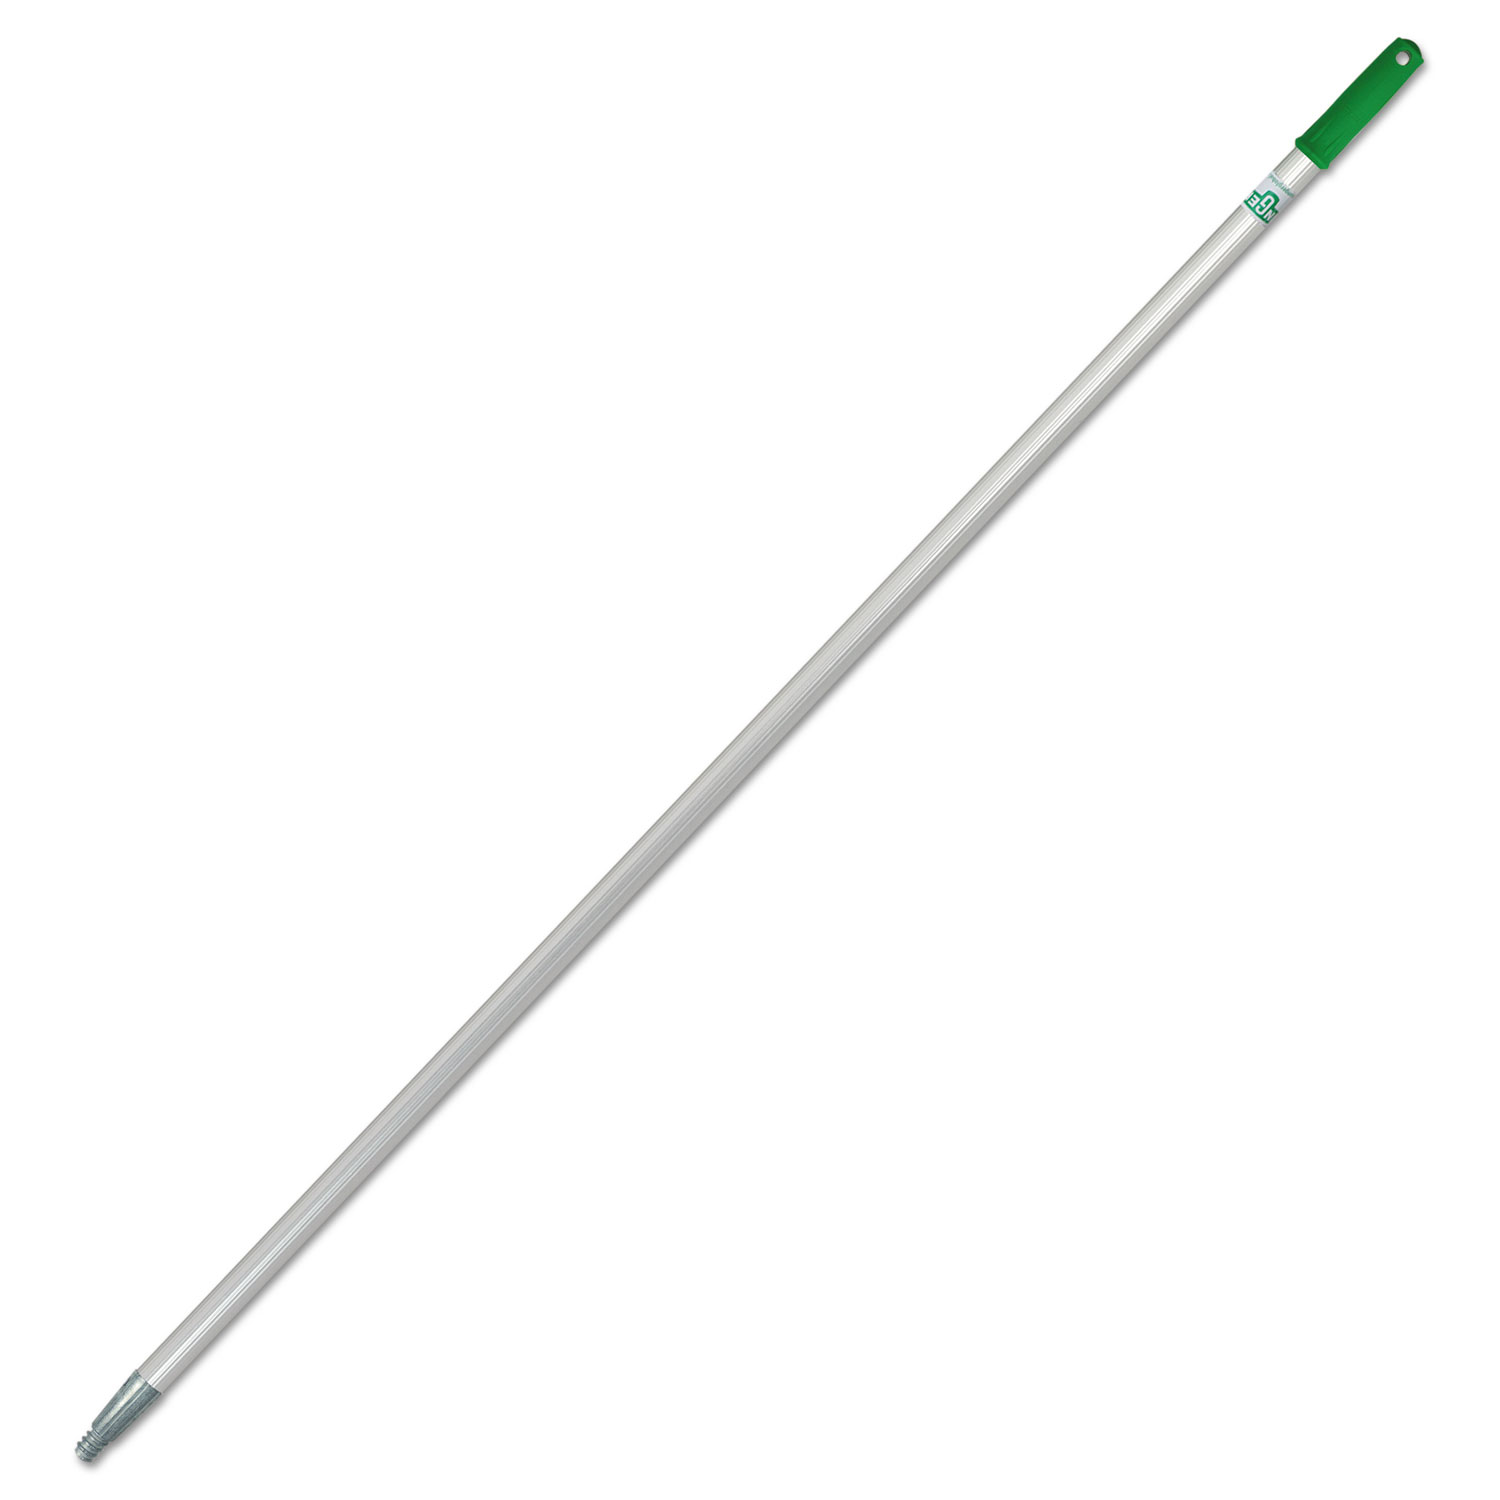  Unger AL14T Pro Aluminum Handle for Floor Squeegees, 3 Degree with Acme, 61 (UNGAL14T0) 